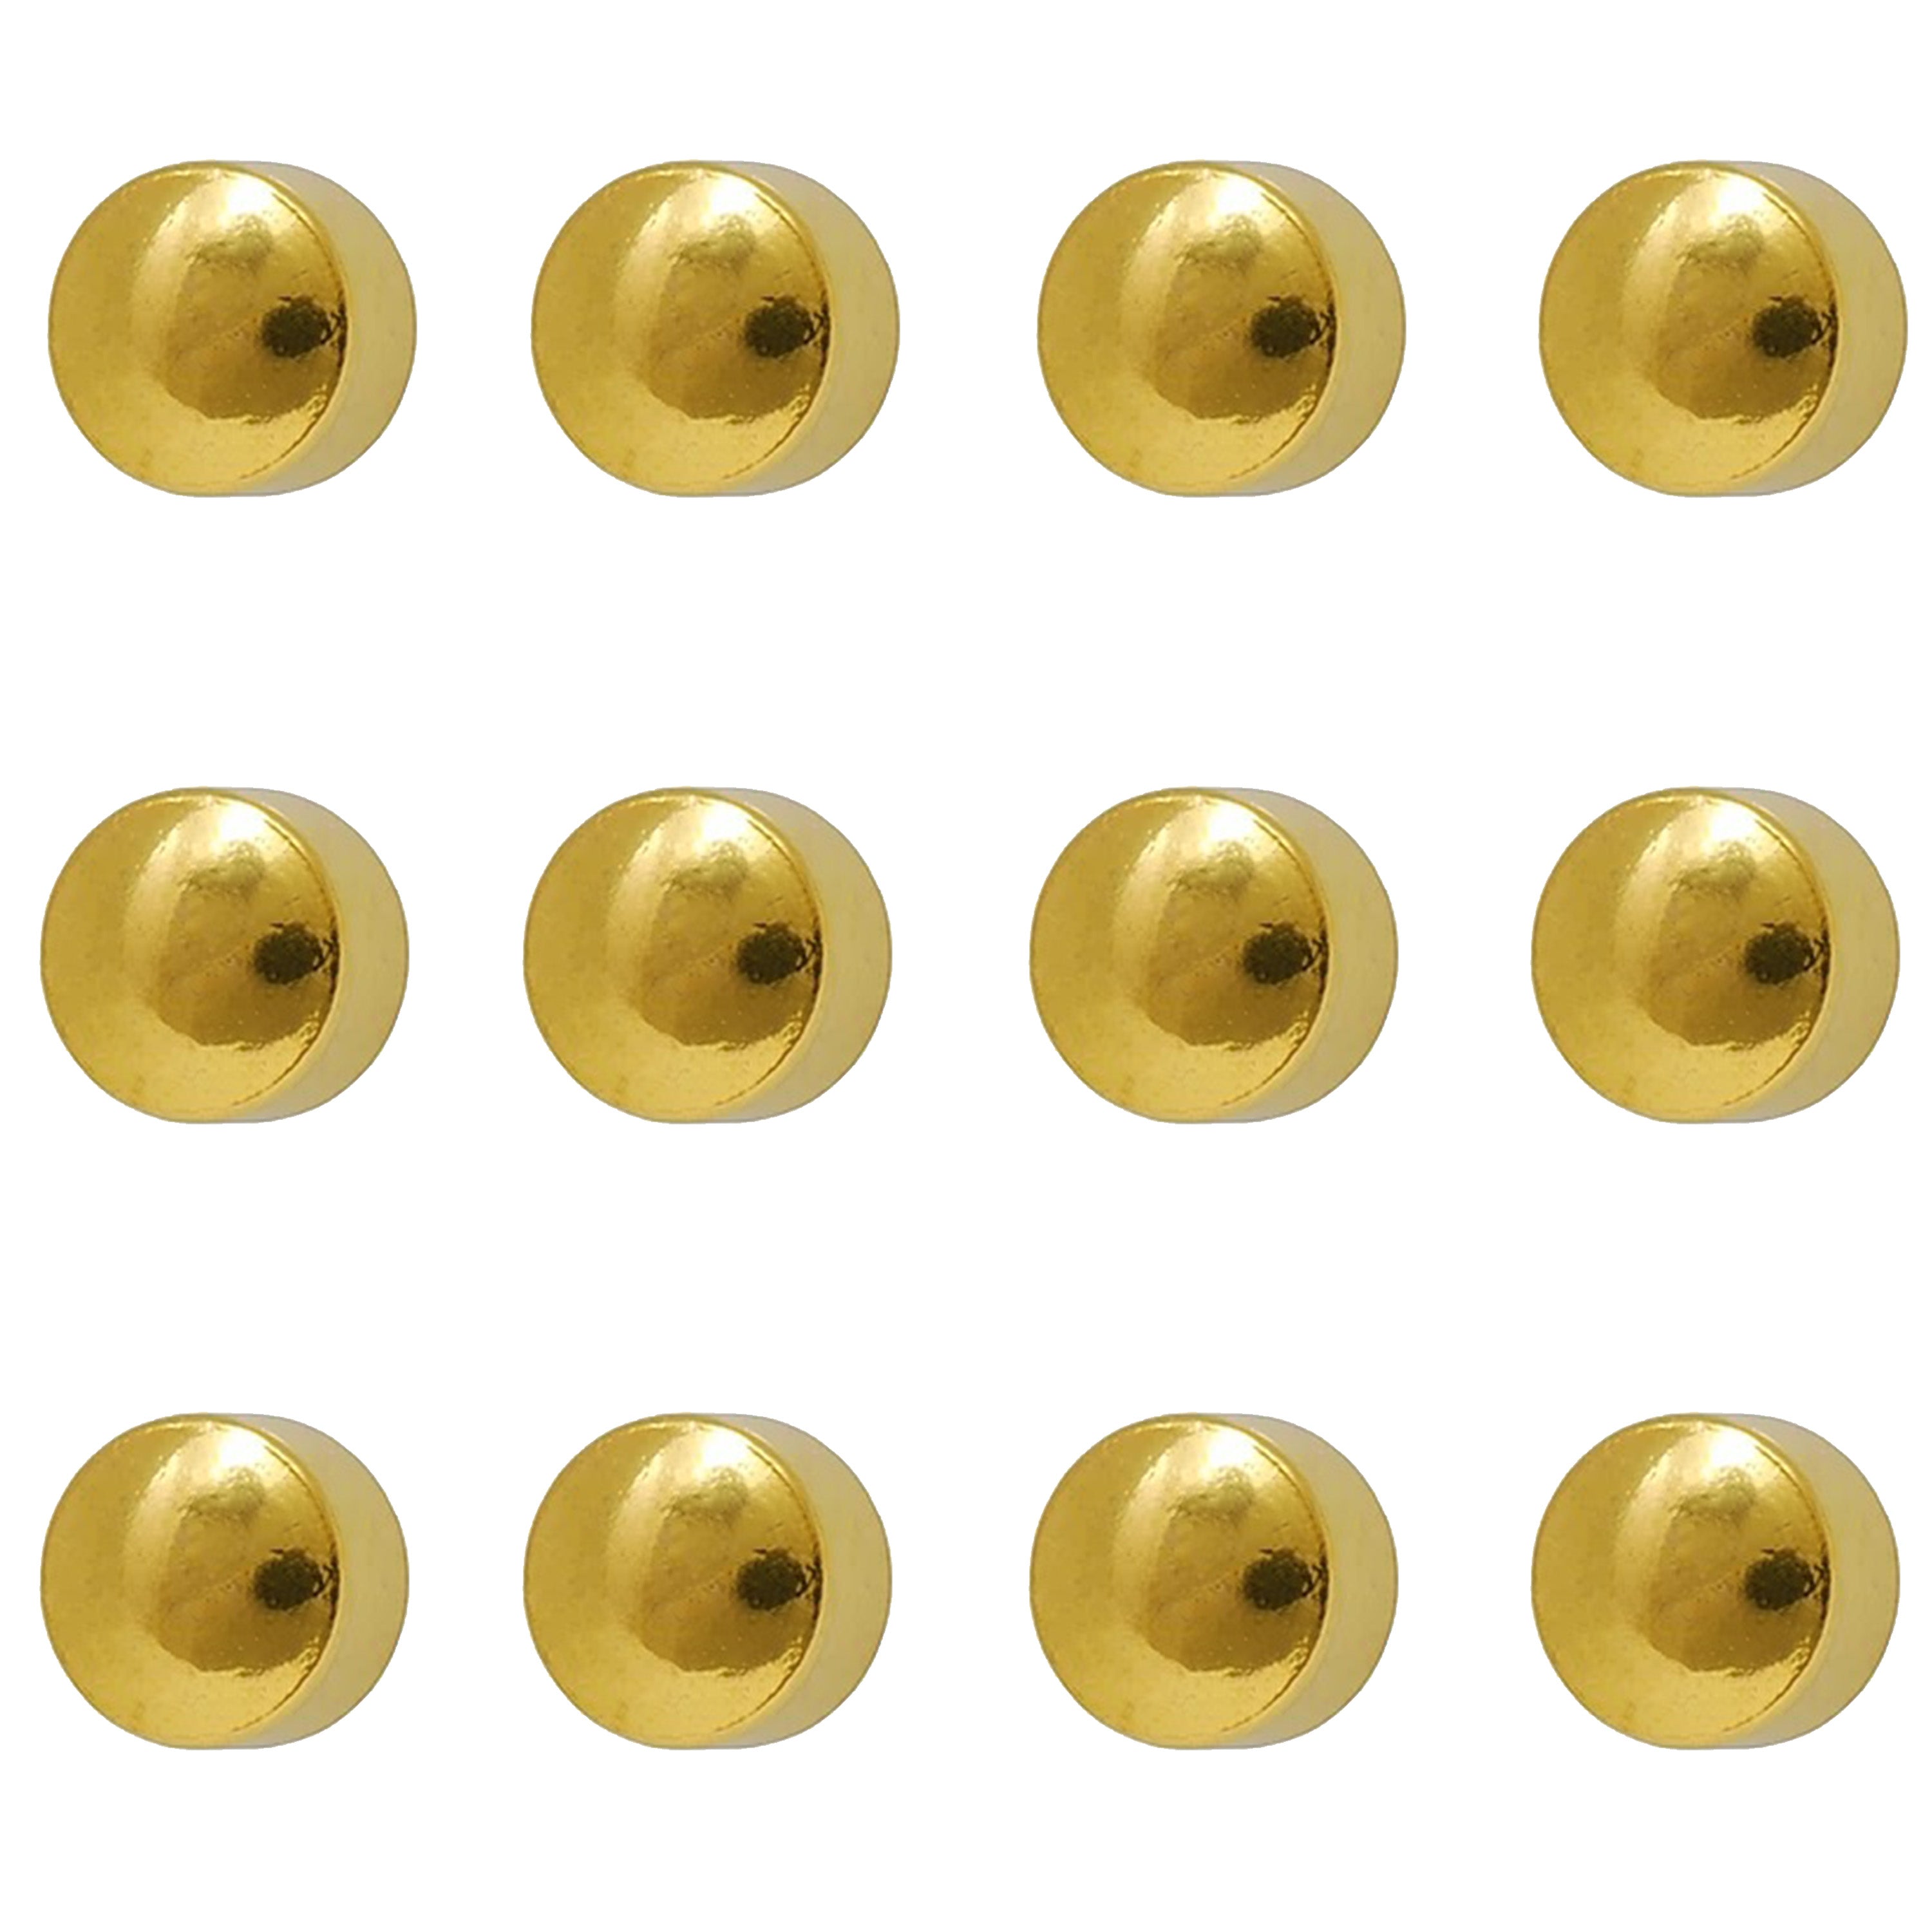 3MM Full Moon 24K Pure Gold Plated Piercing Ear Stud (12 Pair)